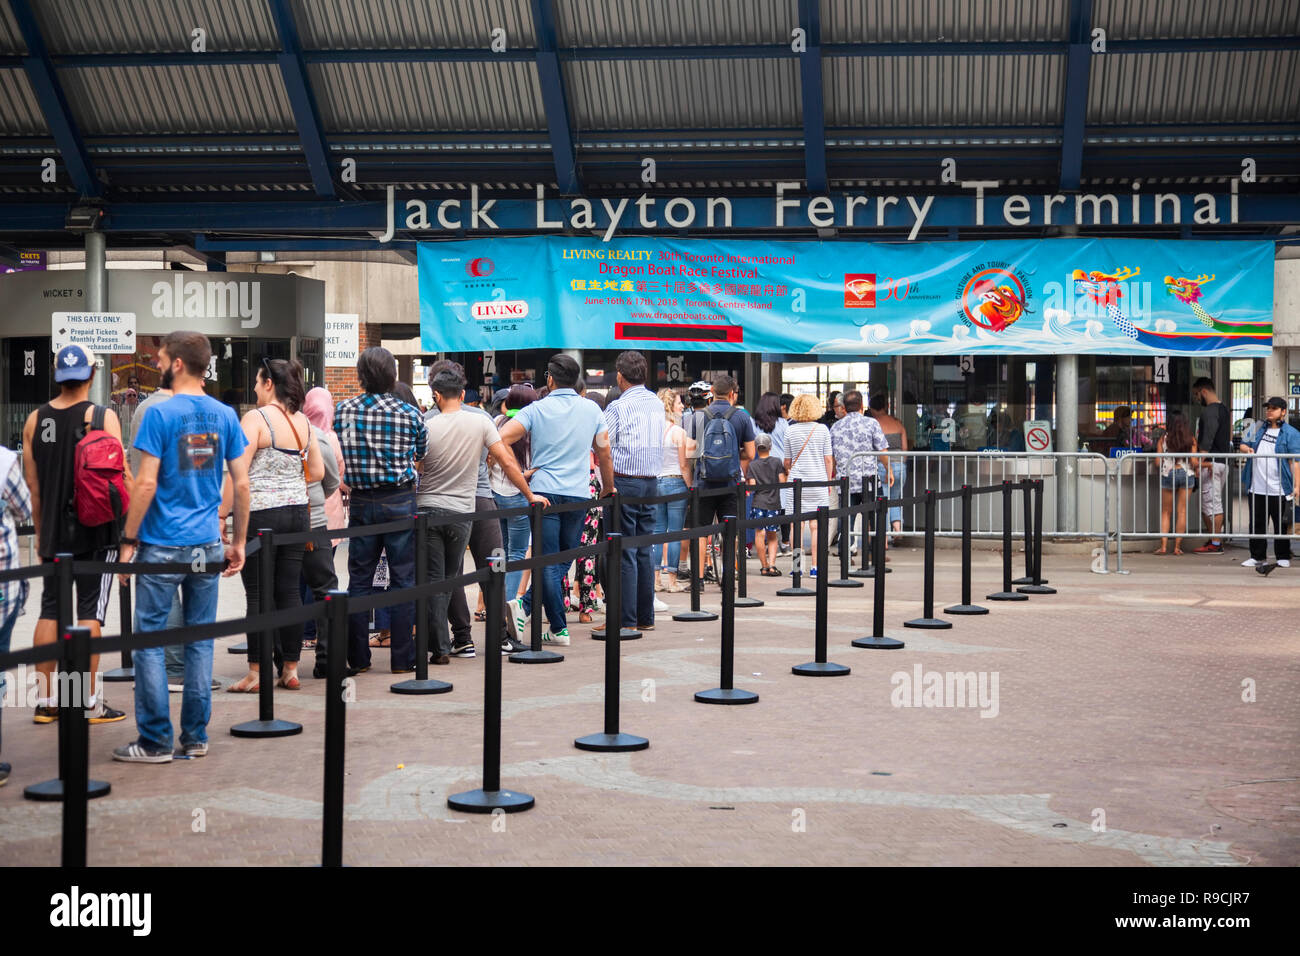 People lined up to buy tickets at The Jack Layton Ferry Terminal. City of Toronto, Ontario, Canada. Stock Photo